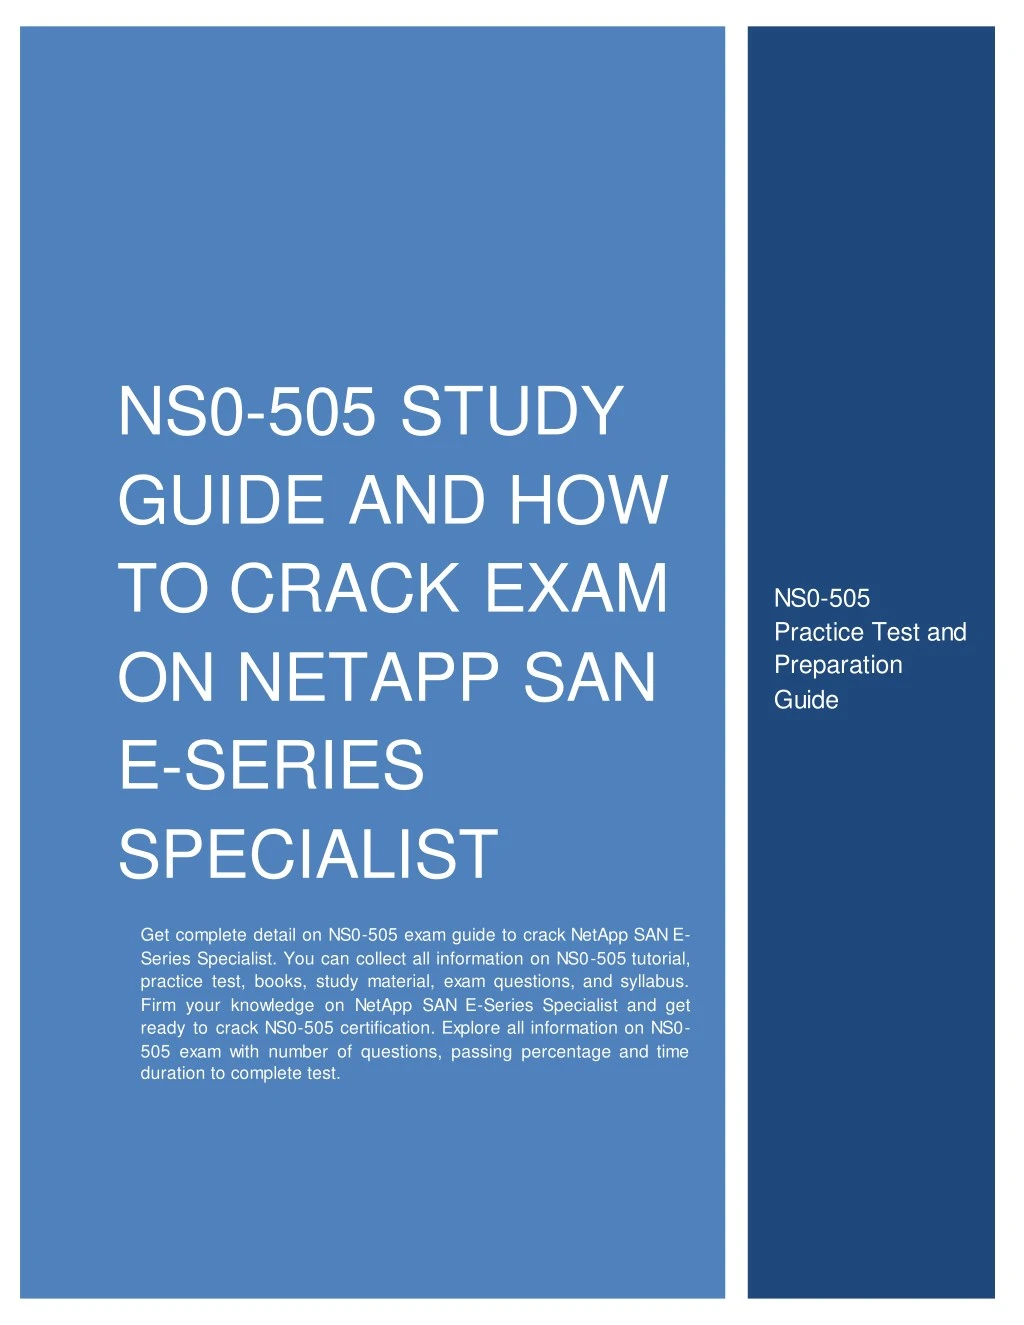 ns0 505 study guide and how to crack exam